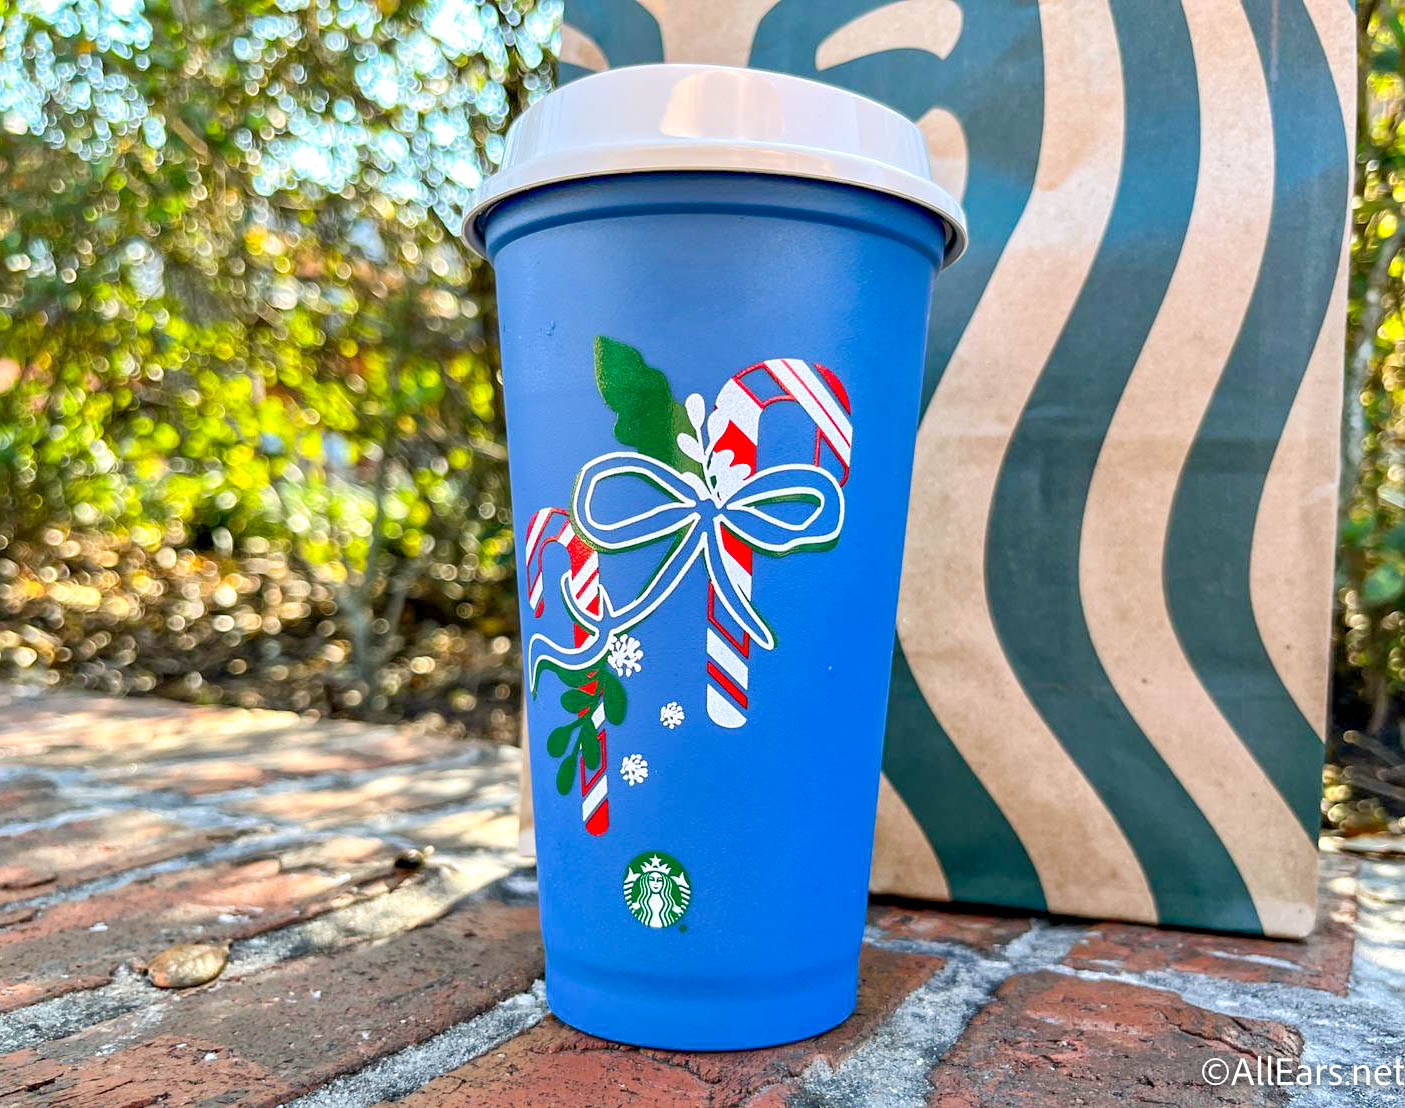 https://allears.net/wp-content/uploads/2021/12/2021-wdw-disney-springs-starbucks-color-changing-candy-cane-cup-5.jpg